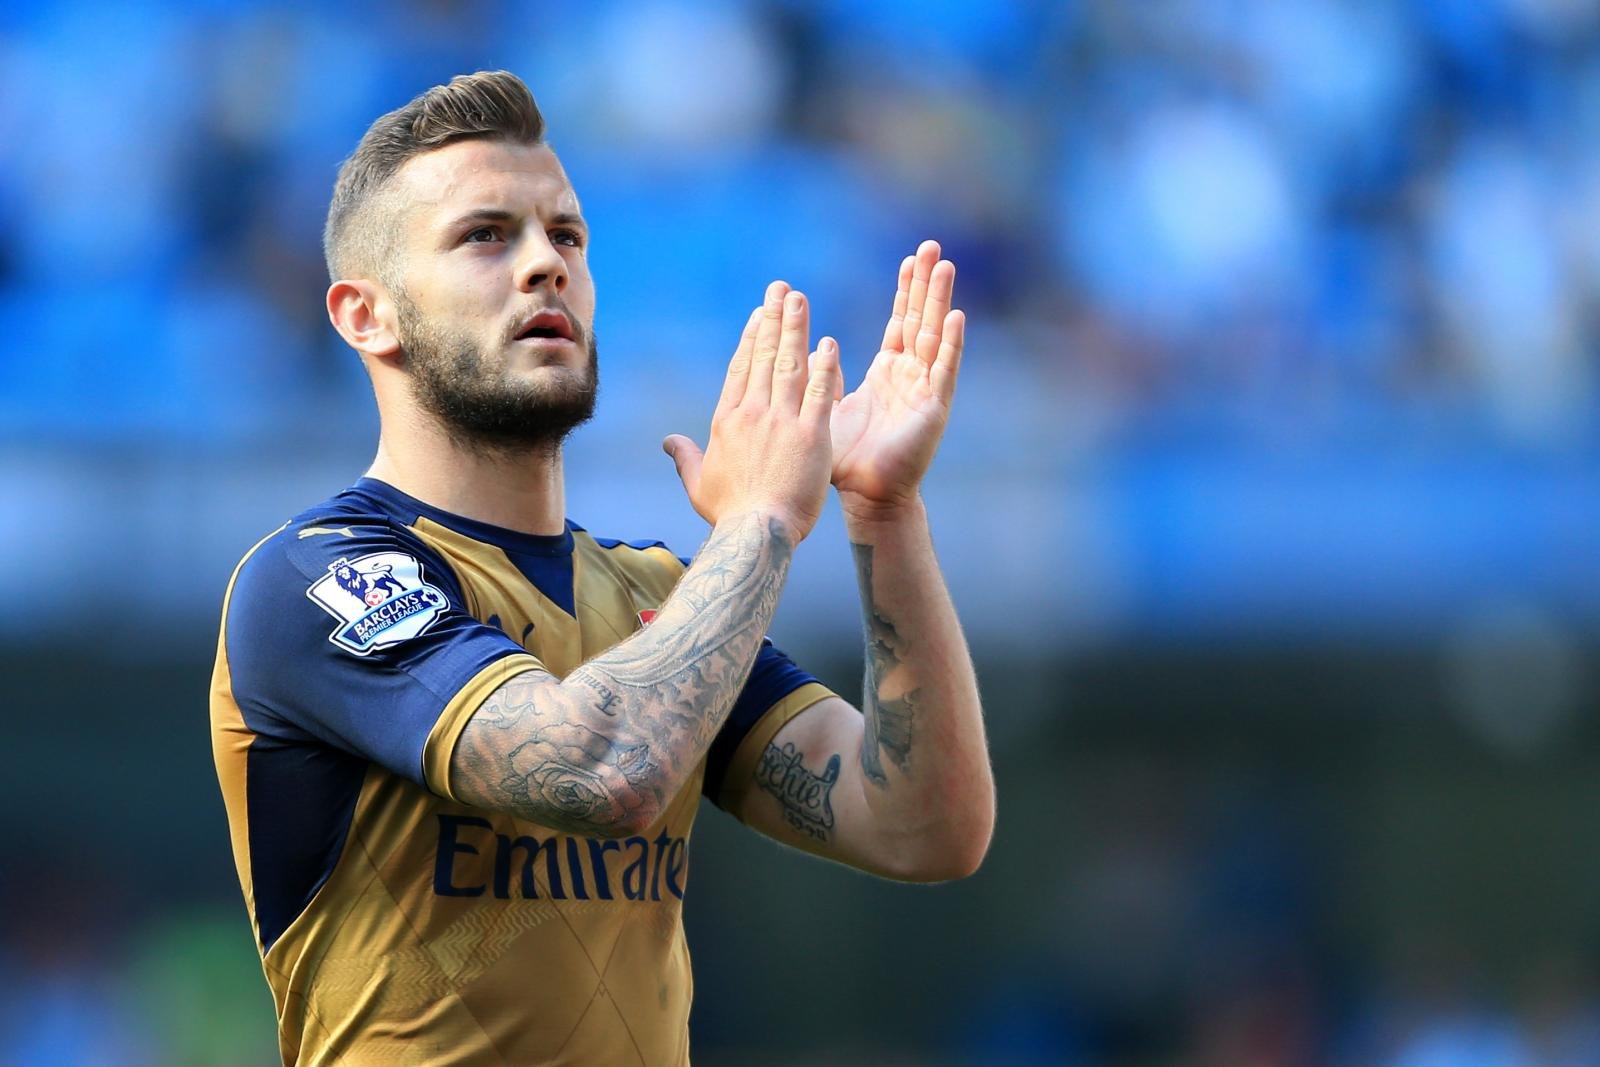 Jack Wilshere edging closer to Premier League deal after Roma deal blocked